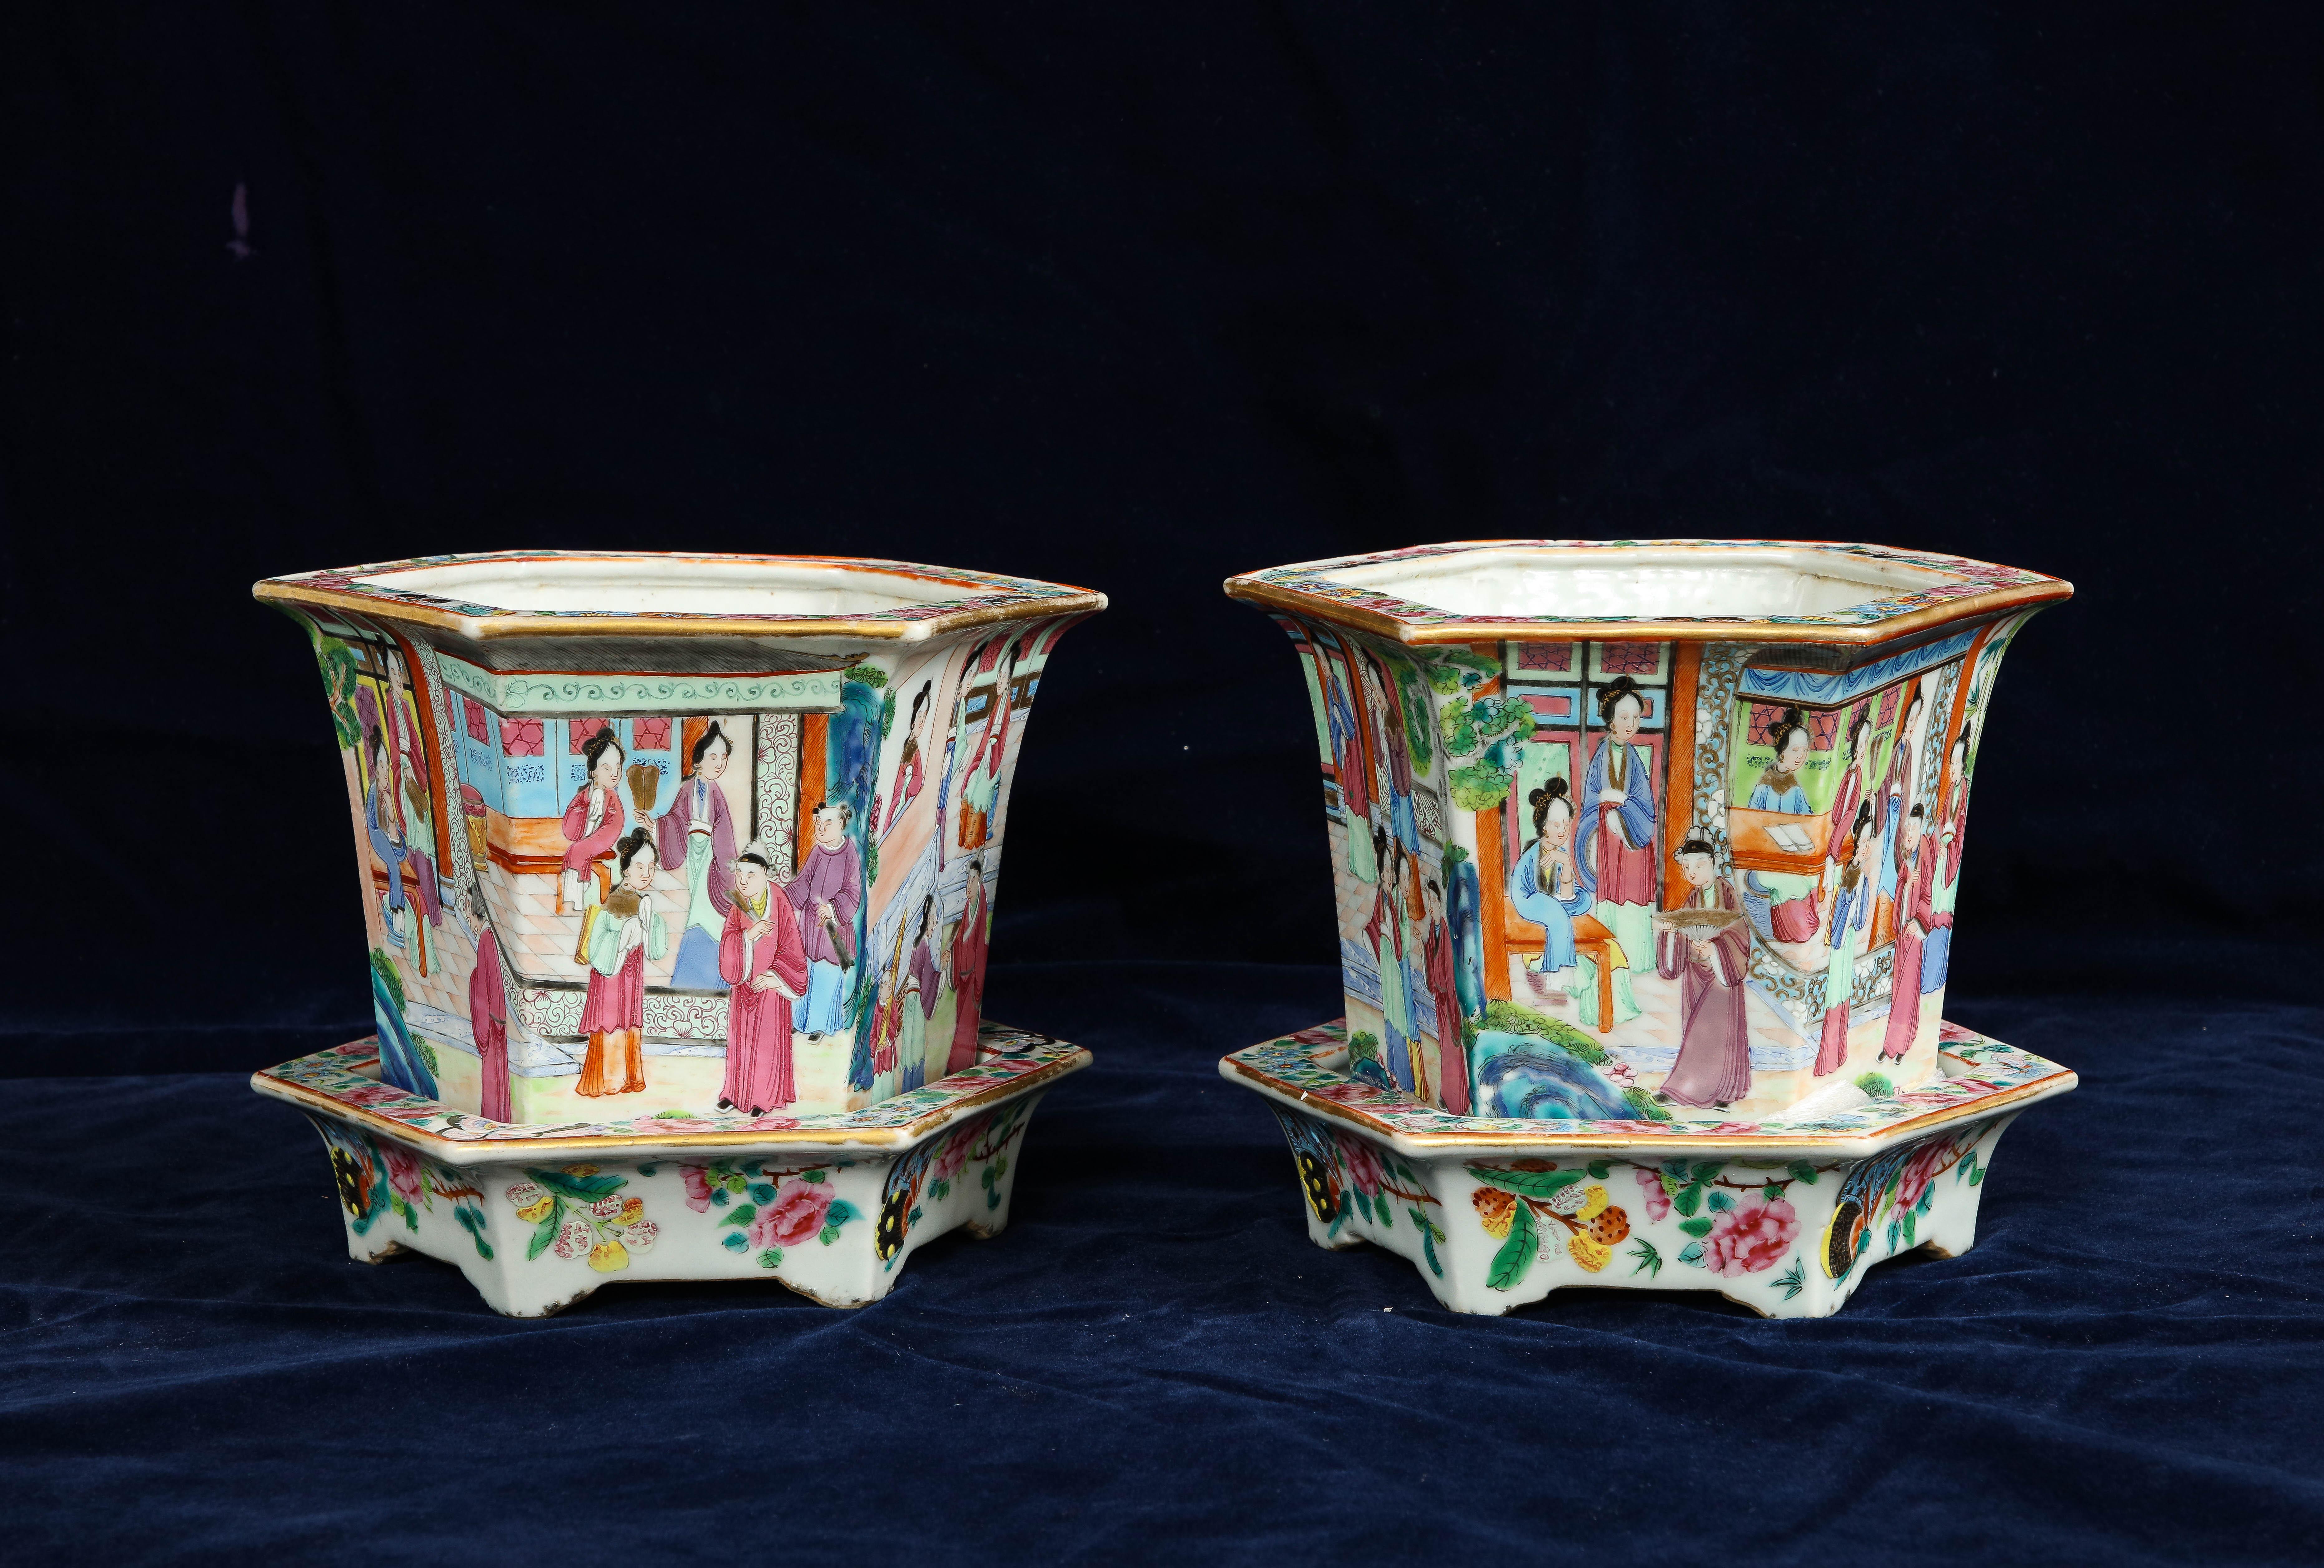 A Pair of 19th century Chinese Rose Medallion Hexagonal Planters with Stands. Each is of an unusual hexagonal form with a beautiful array of rose medallion hand-painted decorations of court ladies in the Imperial palace tending to their righteous